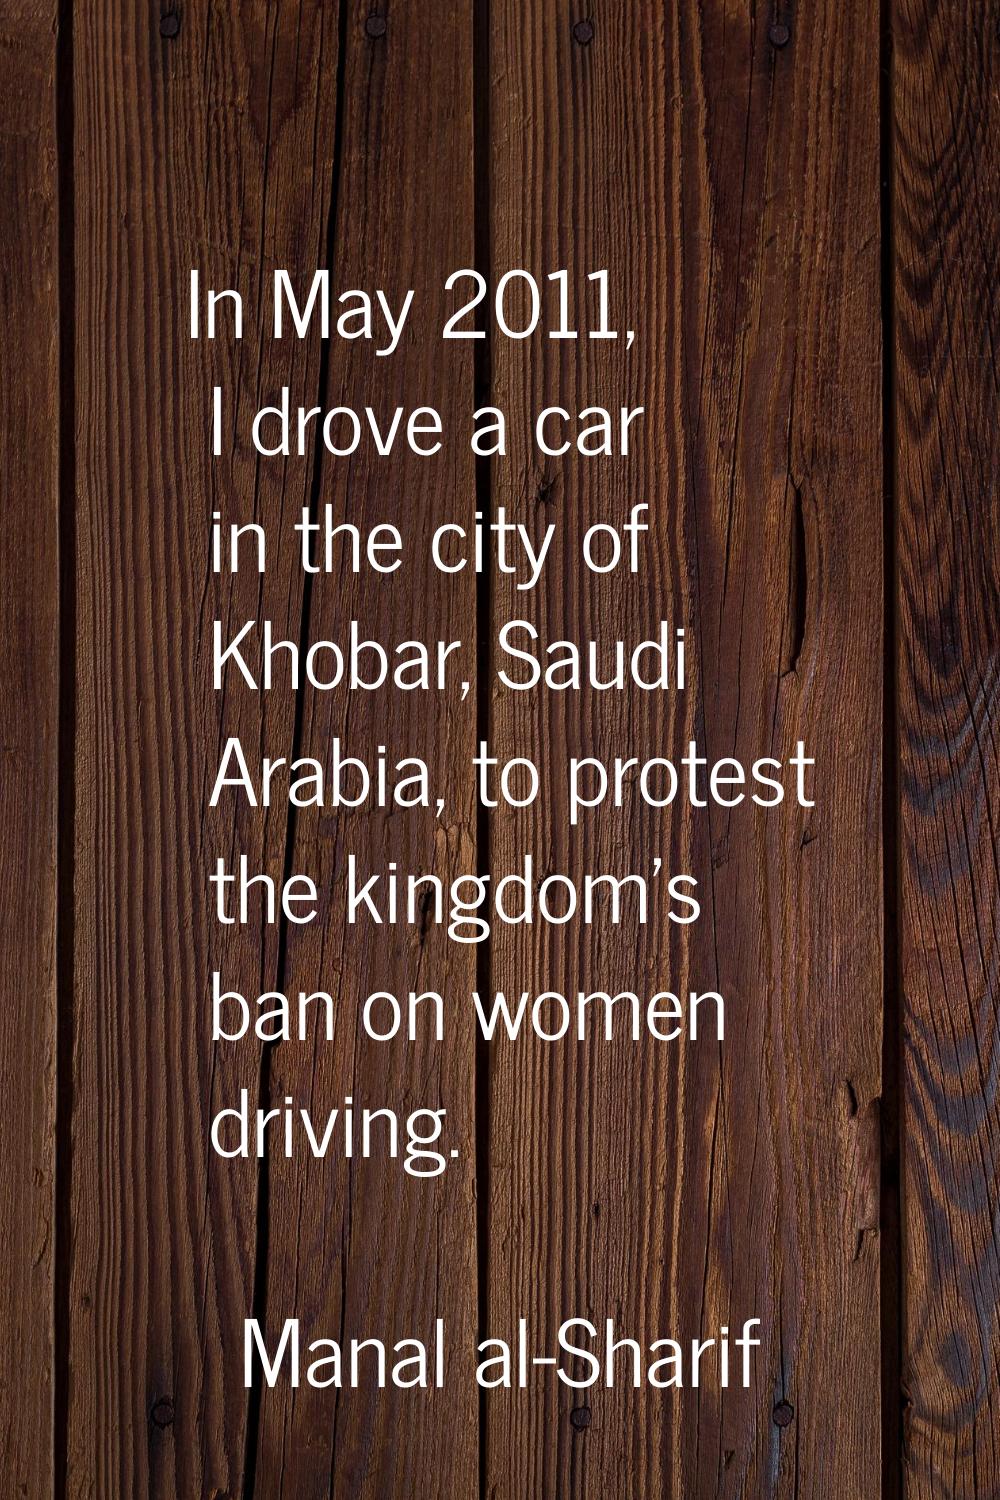 In May 2011, I drove a car in the city of Khobar, Saudi Arabia, to protest the kingdom's ban on wom